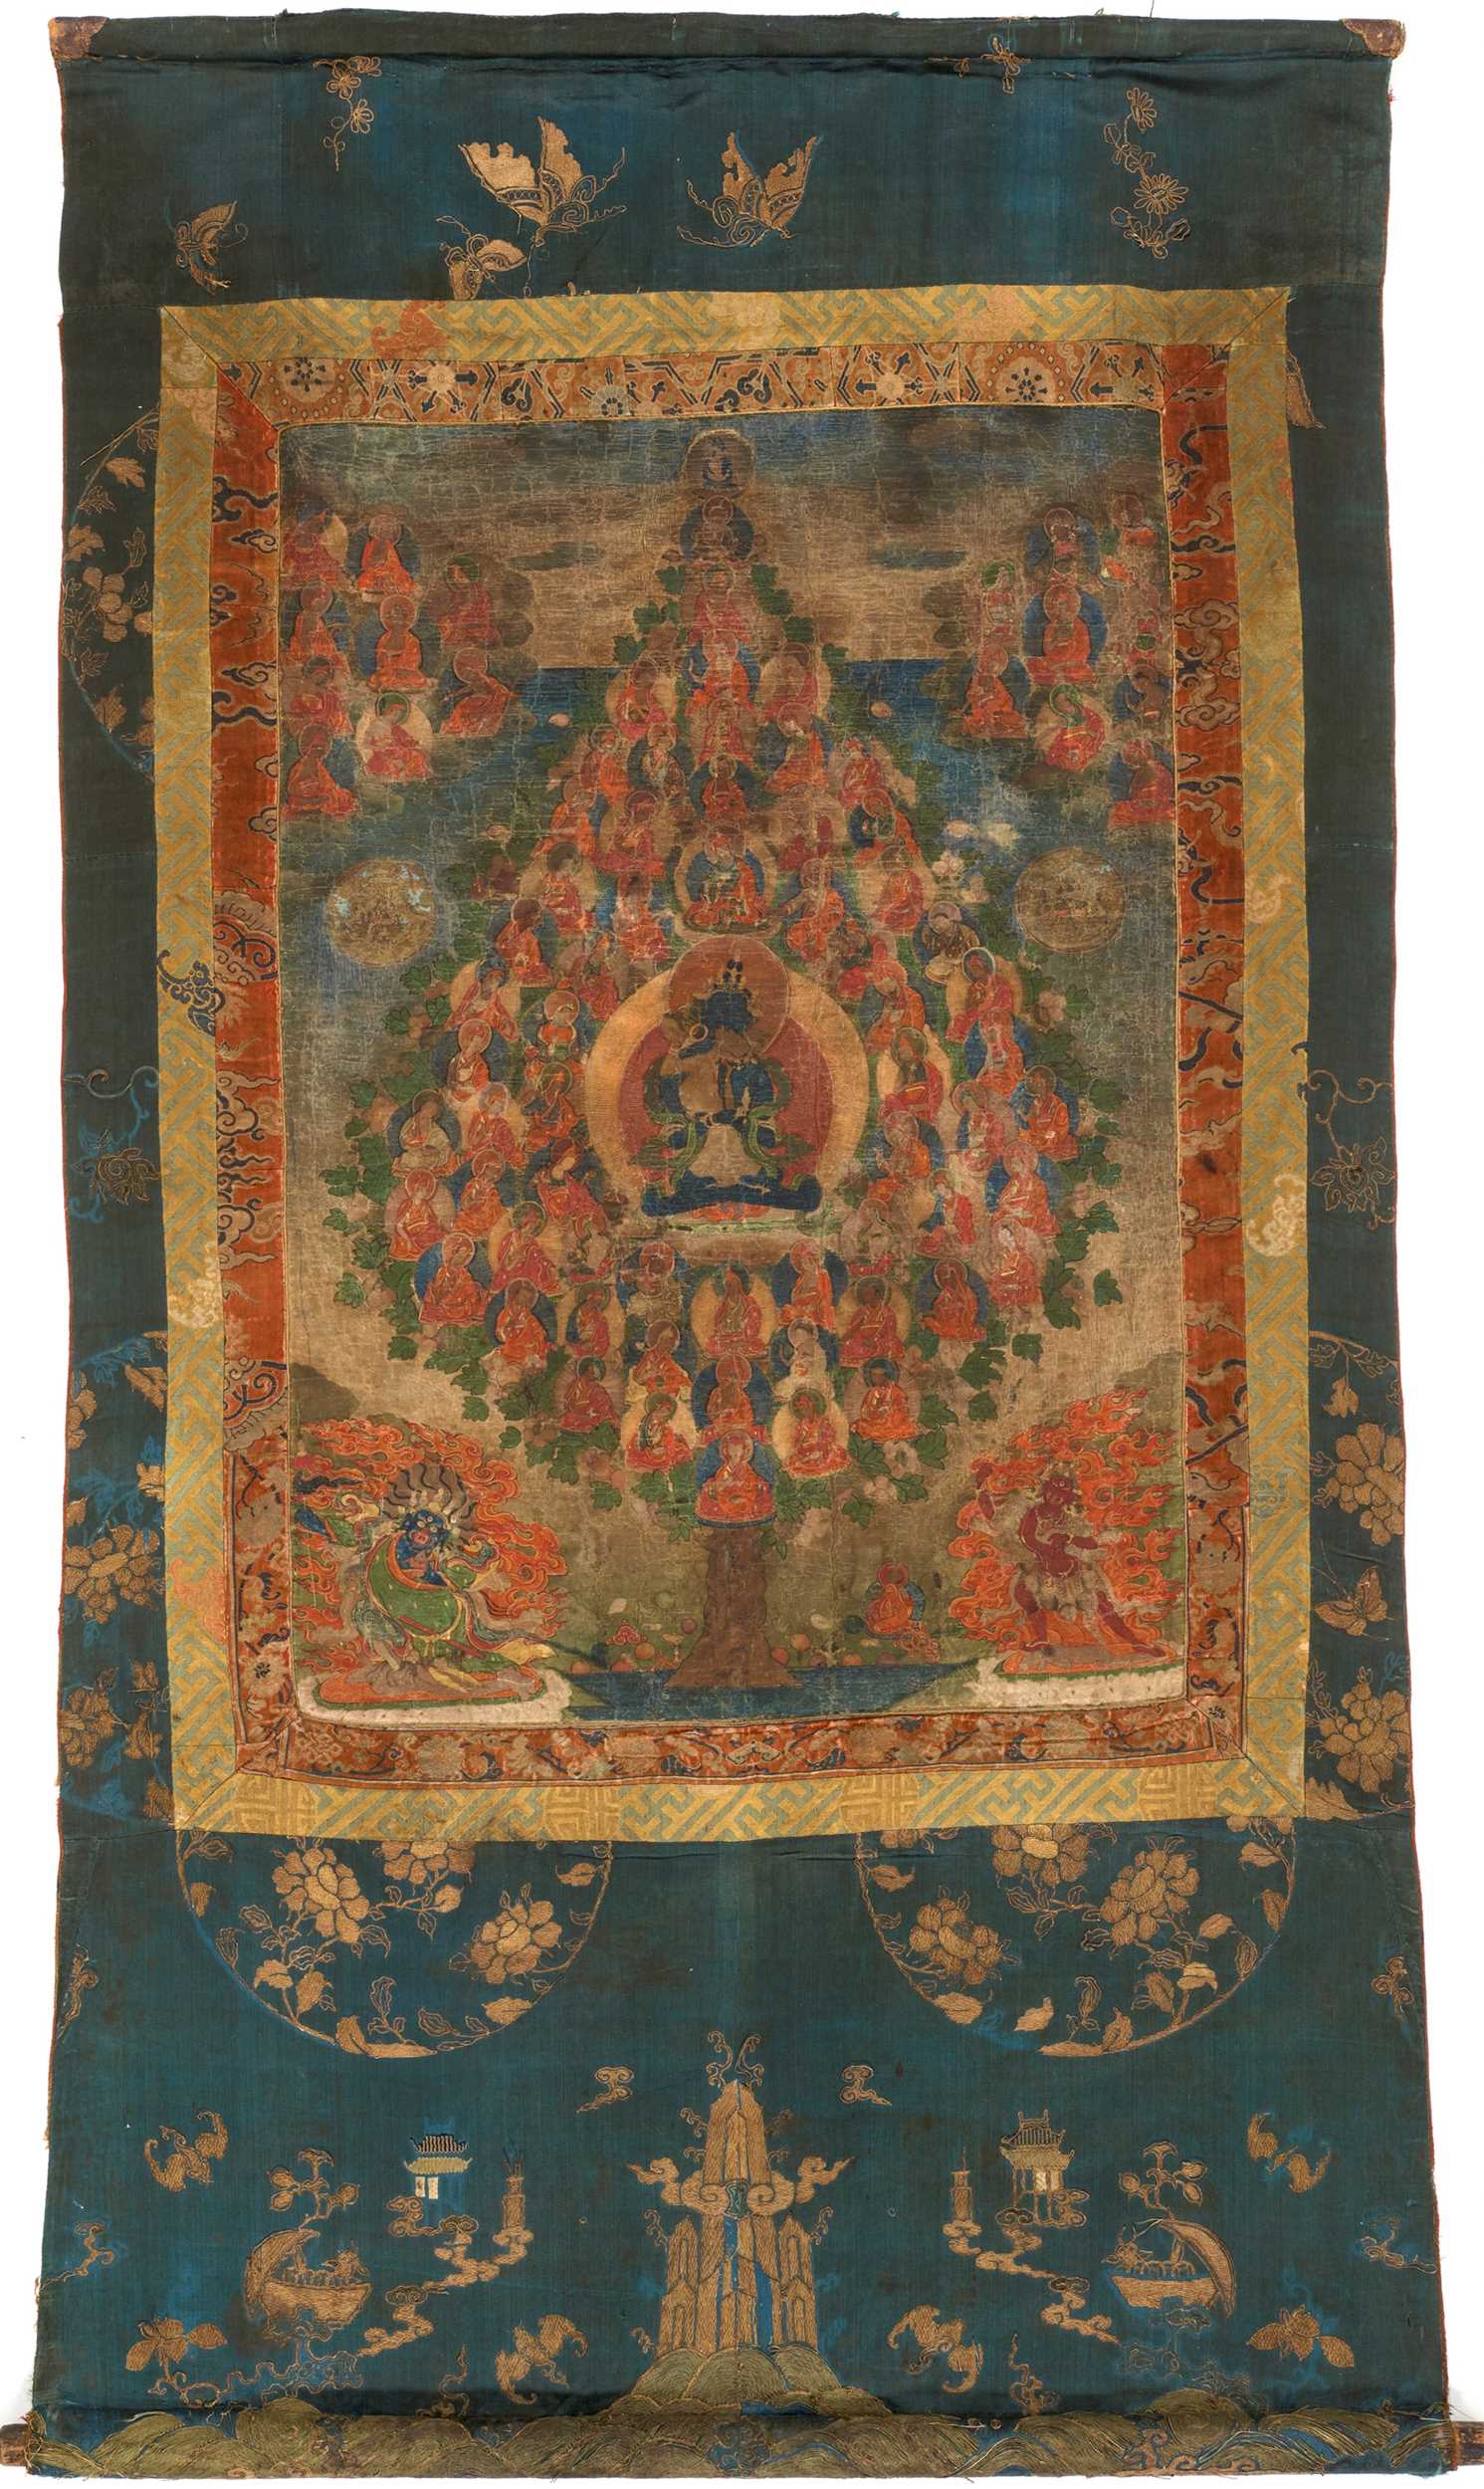 Lot 489 - A RARE THANGKA DEPICTING VAJRADHARA AND CONSORT WITHIN A REFUGE FIELD, 18TH CENTURY